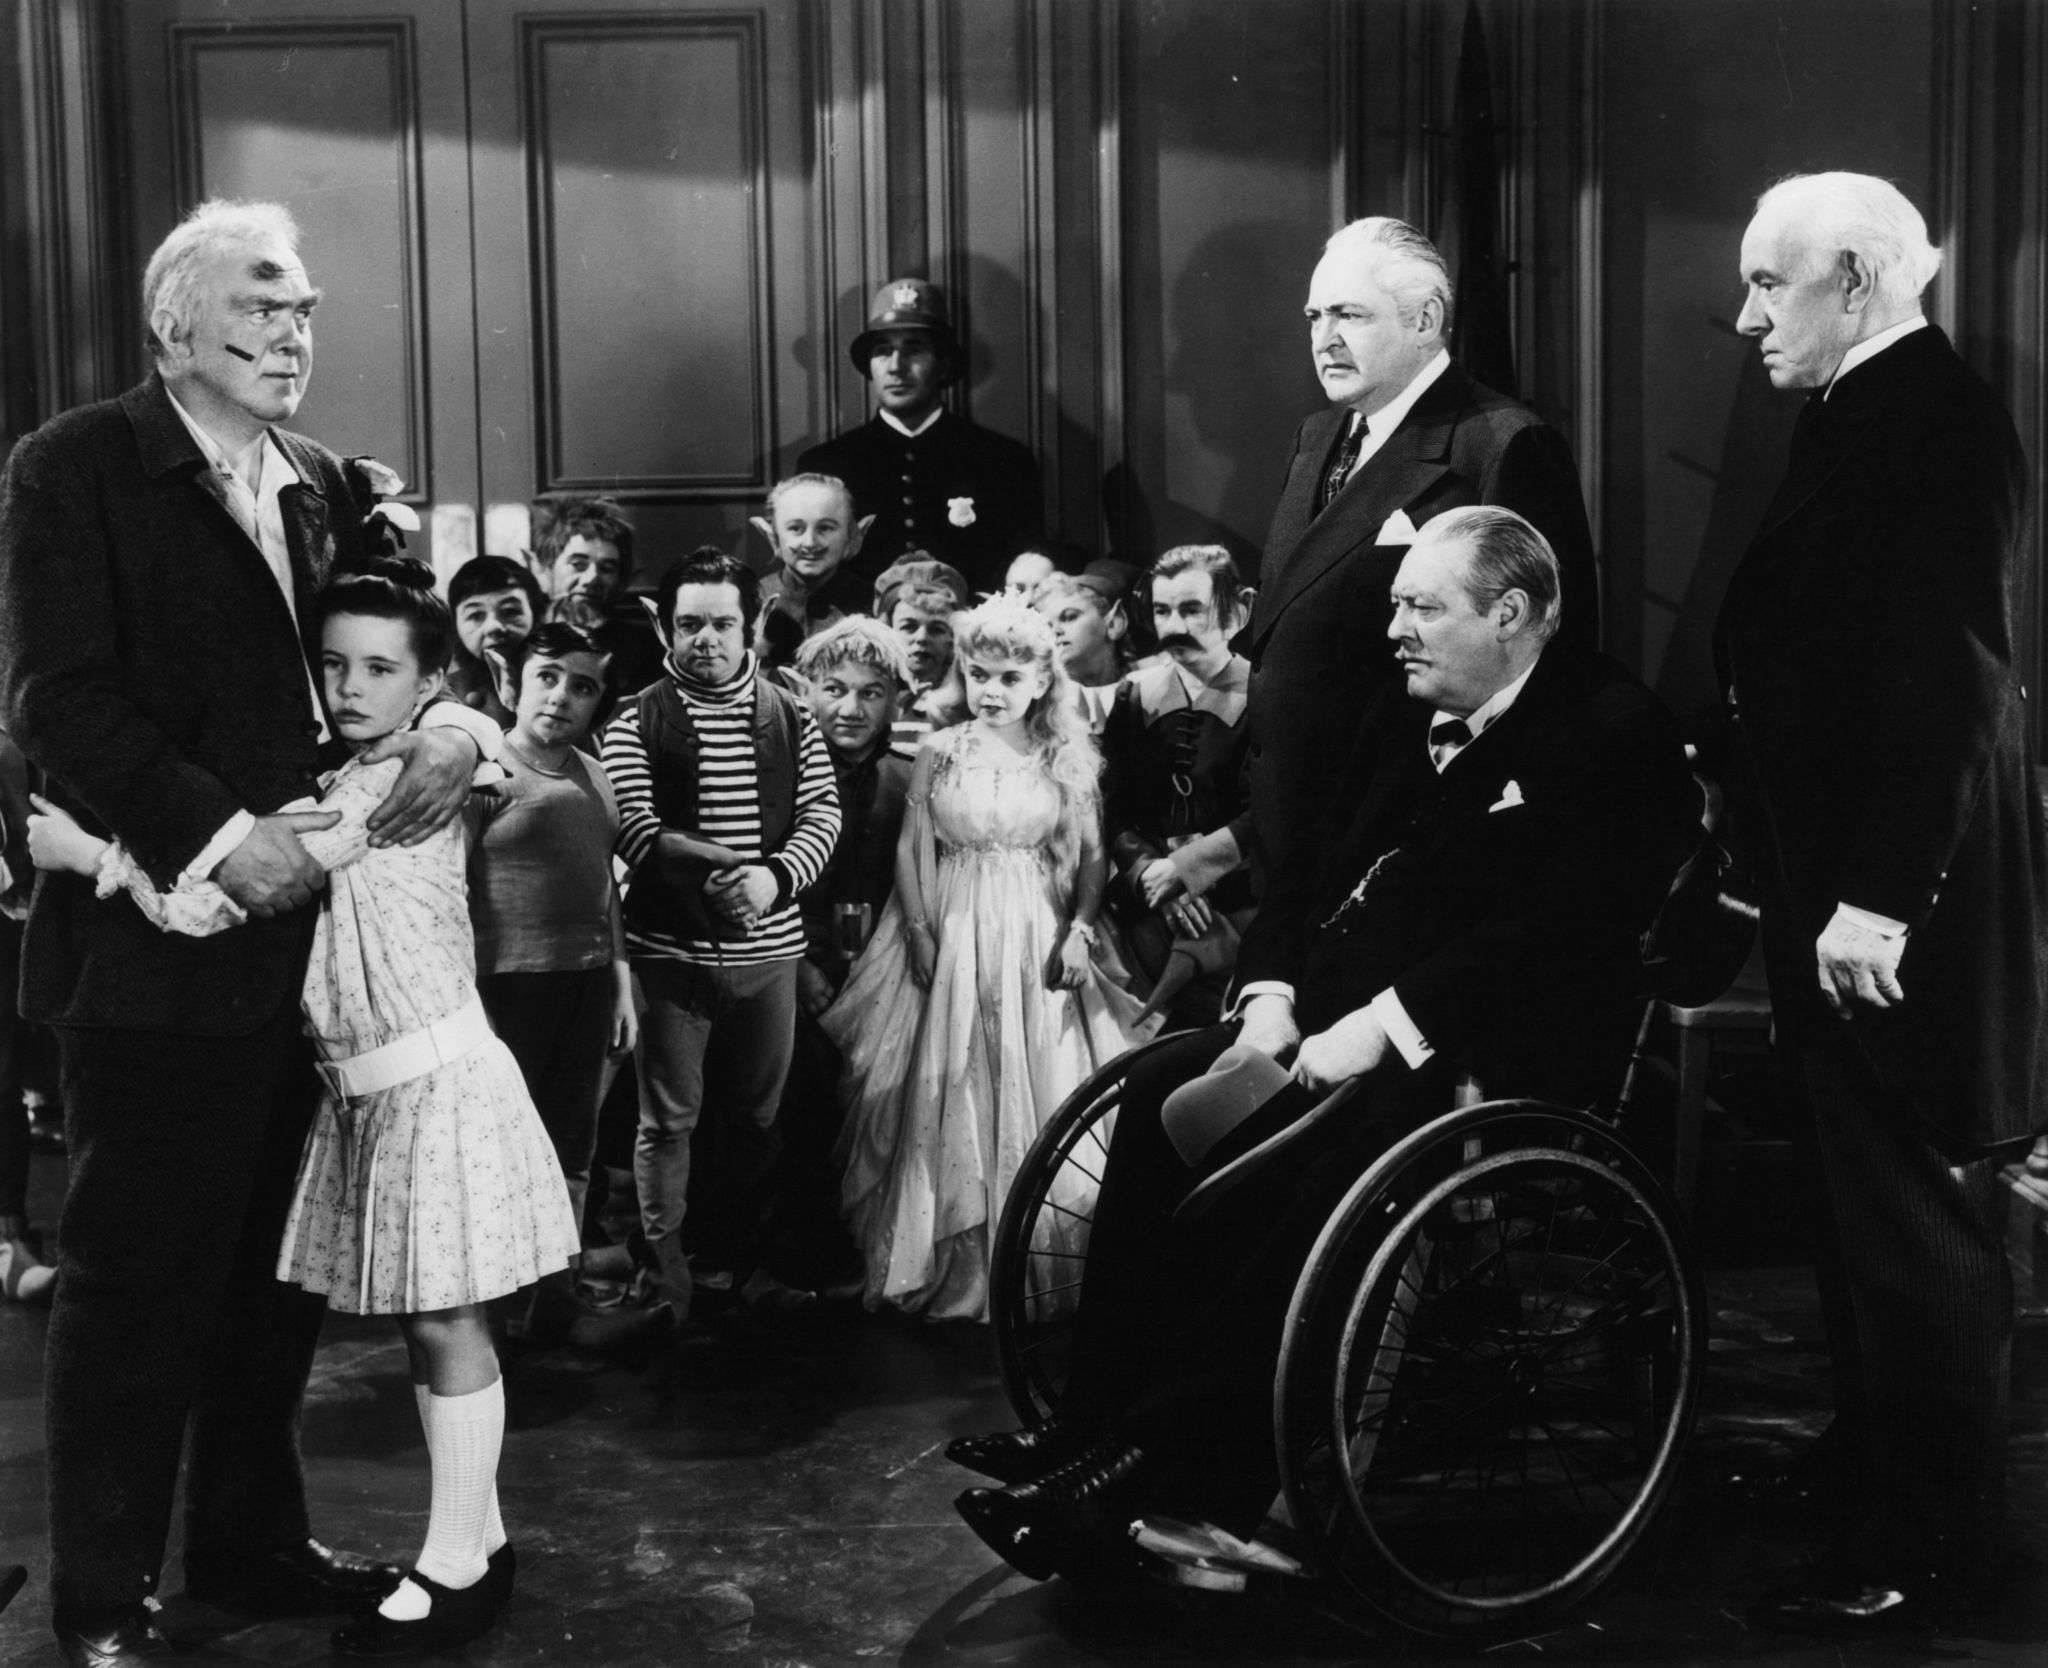 Lionel Barrymore, Billy Barty, Edward Arnold, Billy Curtis, Bobby Driscoll, Nita Krebs, Thomas Mitchell, Margaret O'Brien and Lewis Stone in Three Wise Fools (1946)